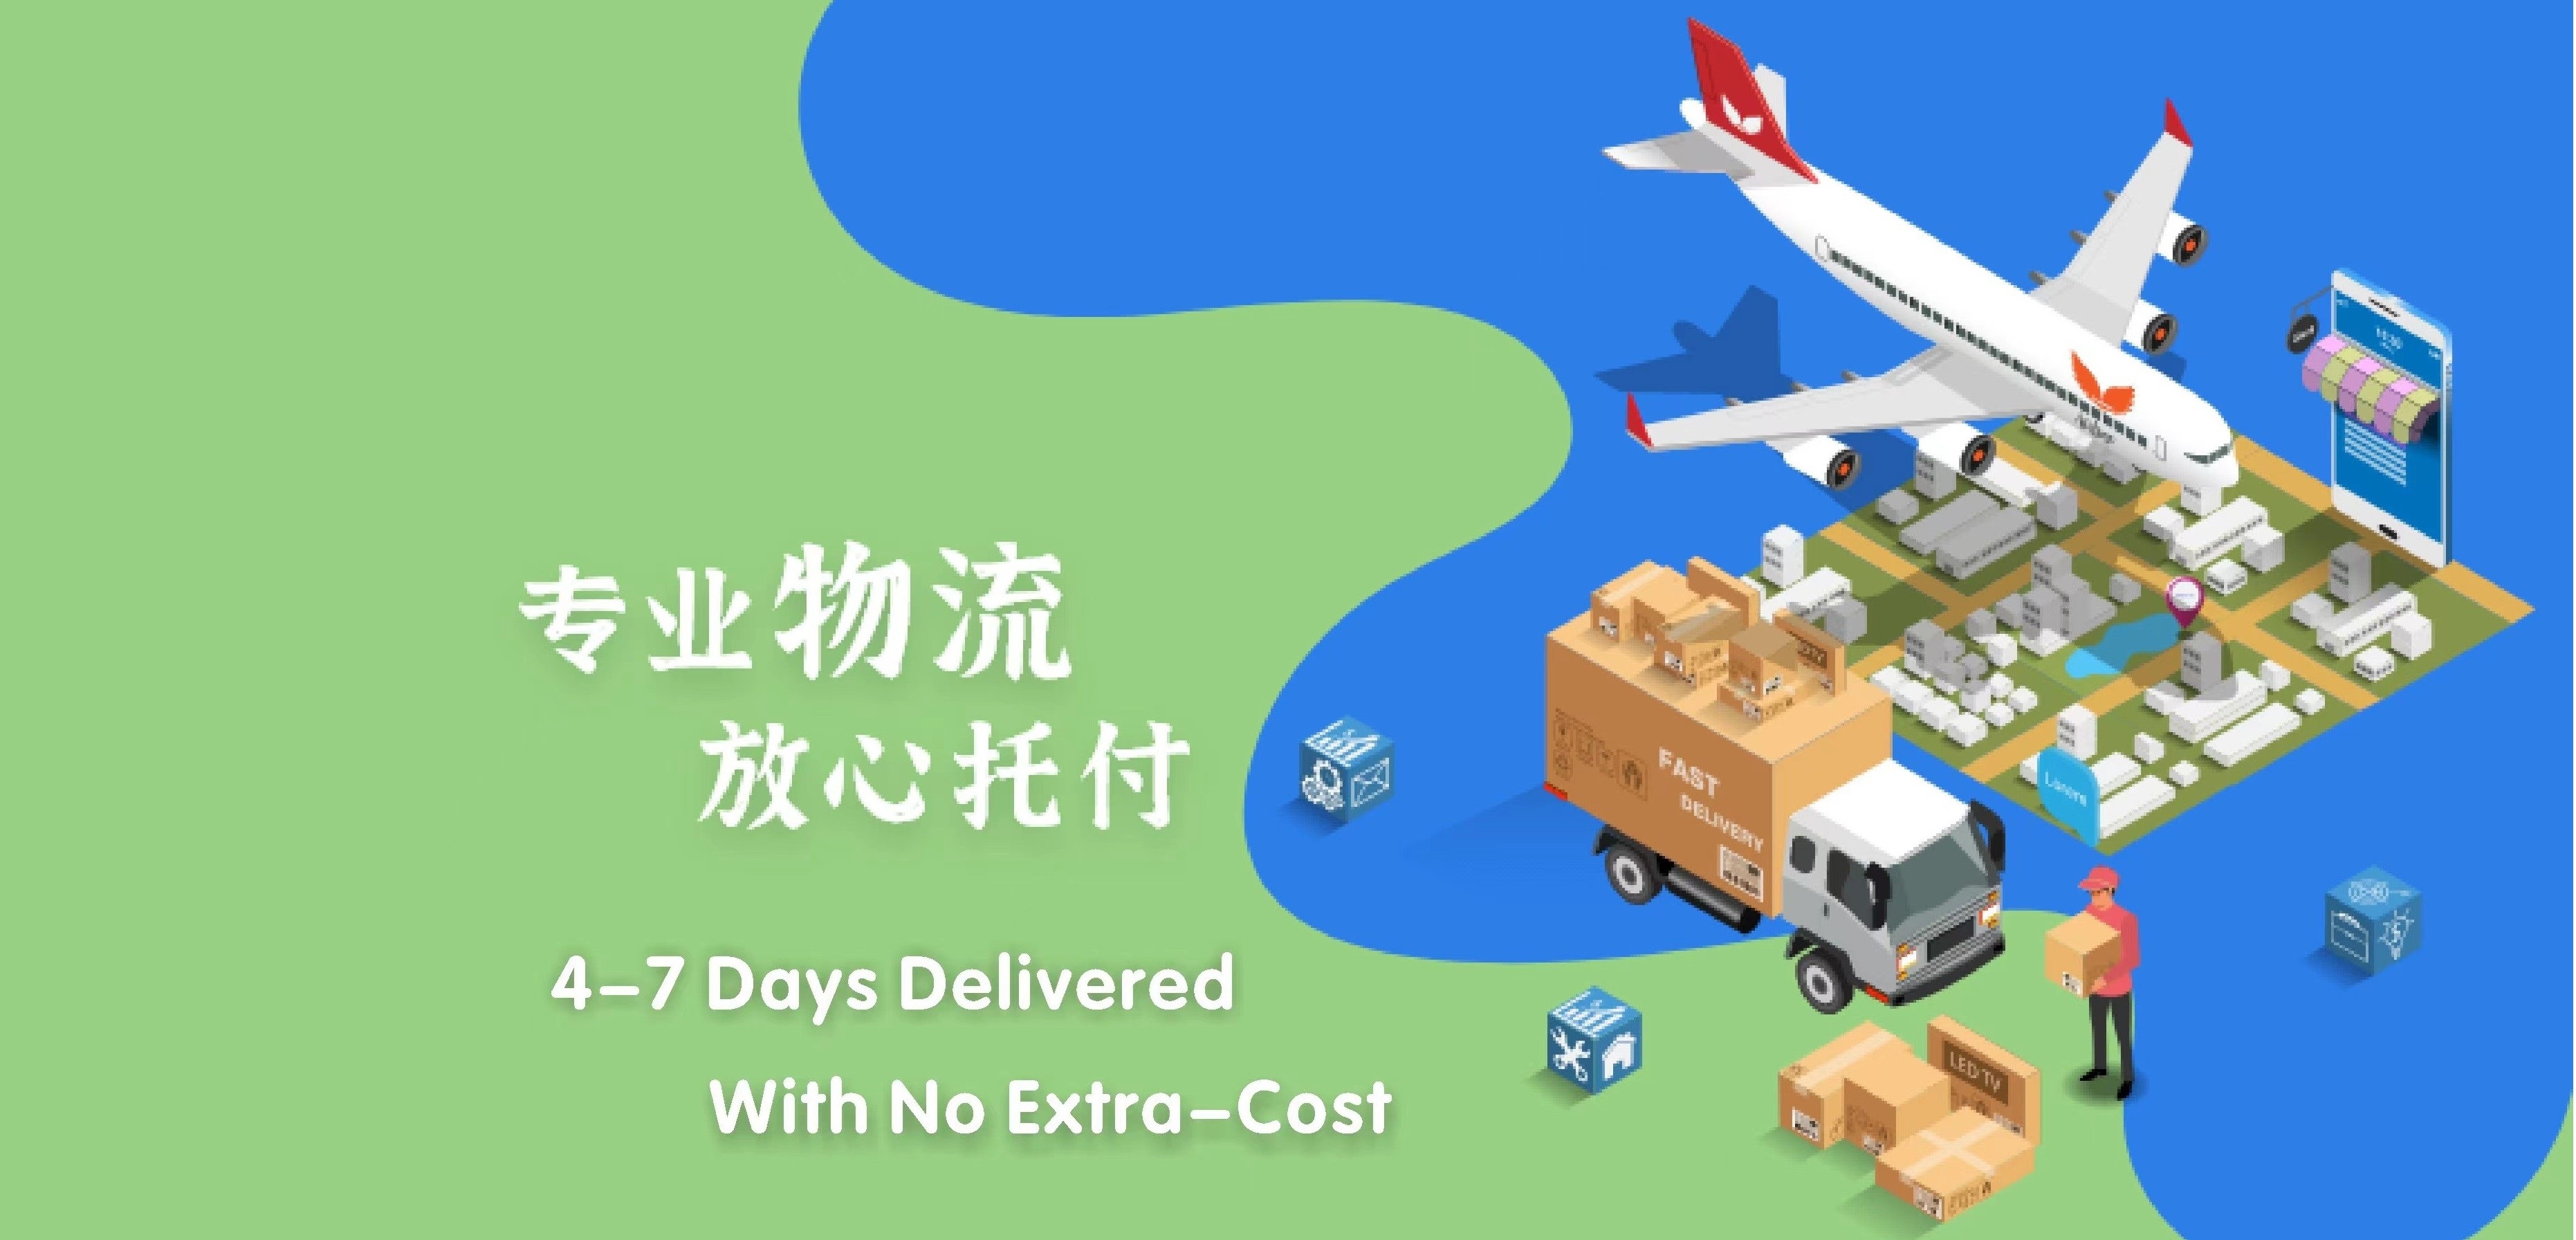 PROOF OF DELIVERY---Delivered With No Extra-Cost 